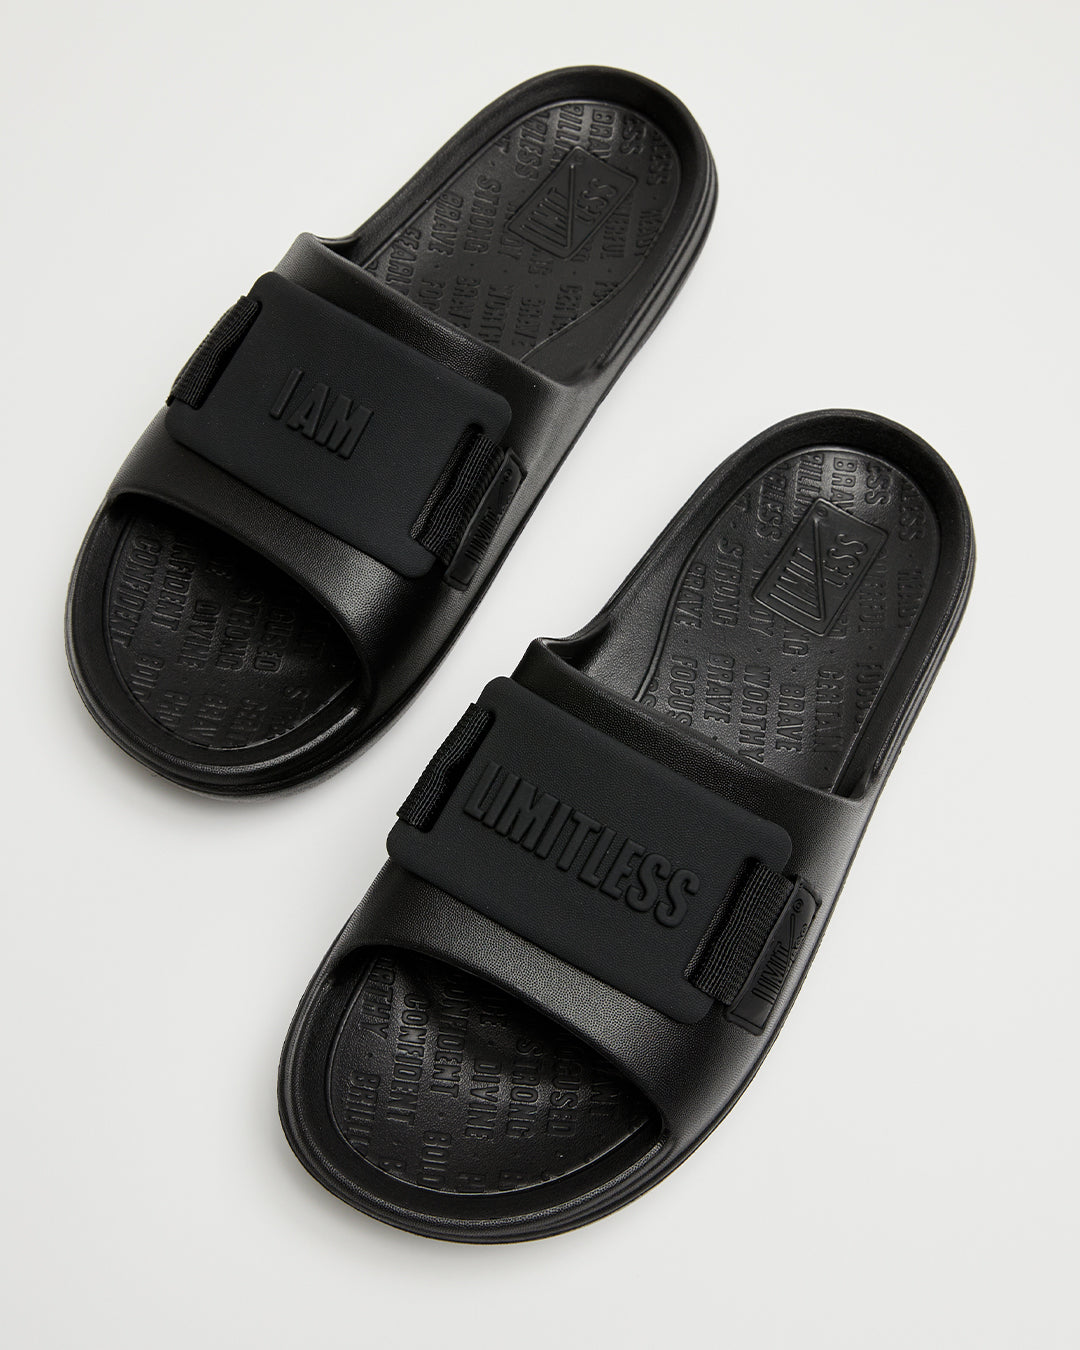 LIMITLESS SLIDES™ WITH ESSENTIAL TIBAH™ QUAD - LIBERTY NORTH HIGH SCHOOL EDITION